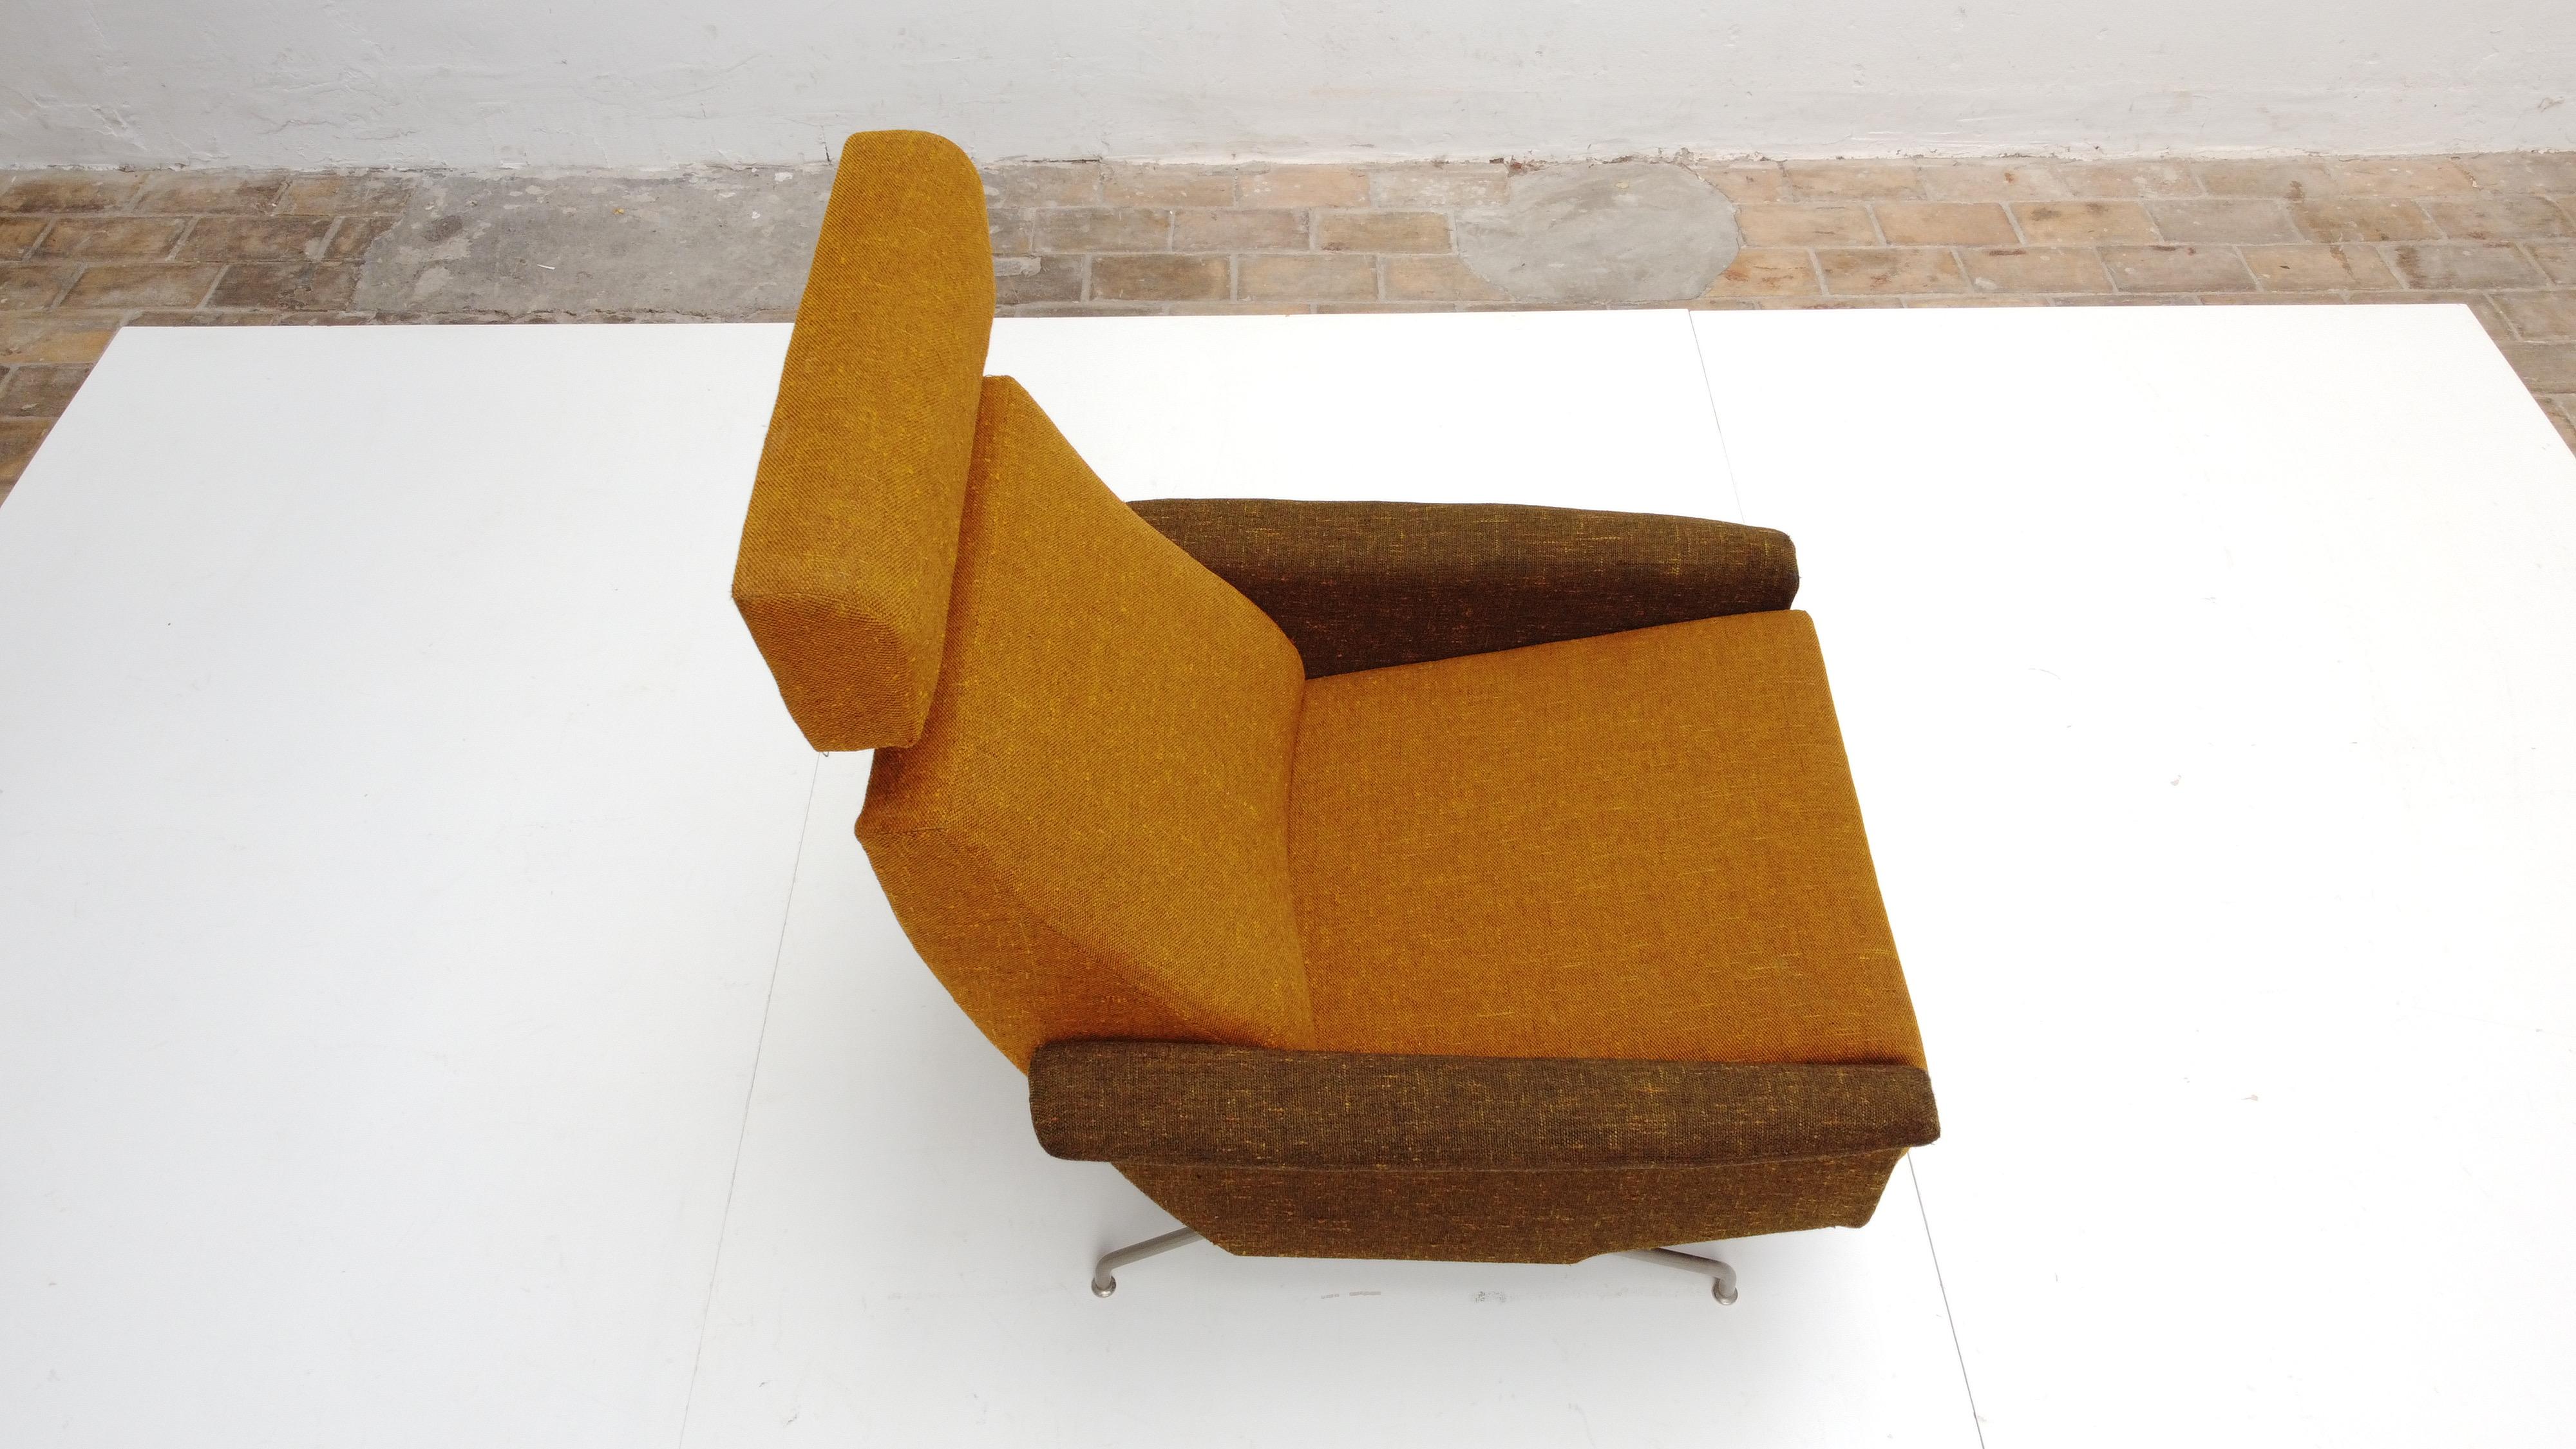 Plated Superb Reclining Lounge Chair by Georges De Rijck for Beaufort Belgium, 1958